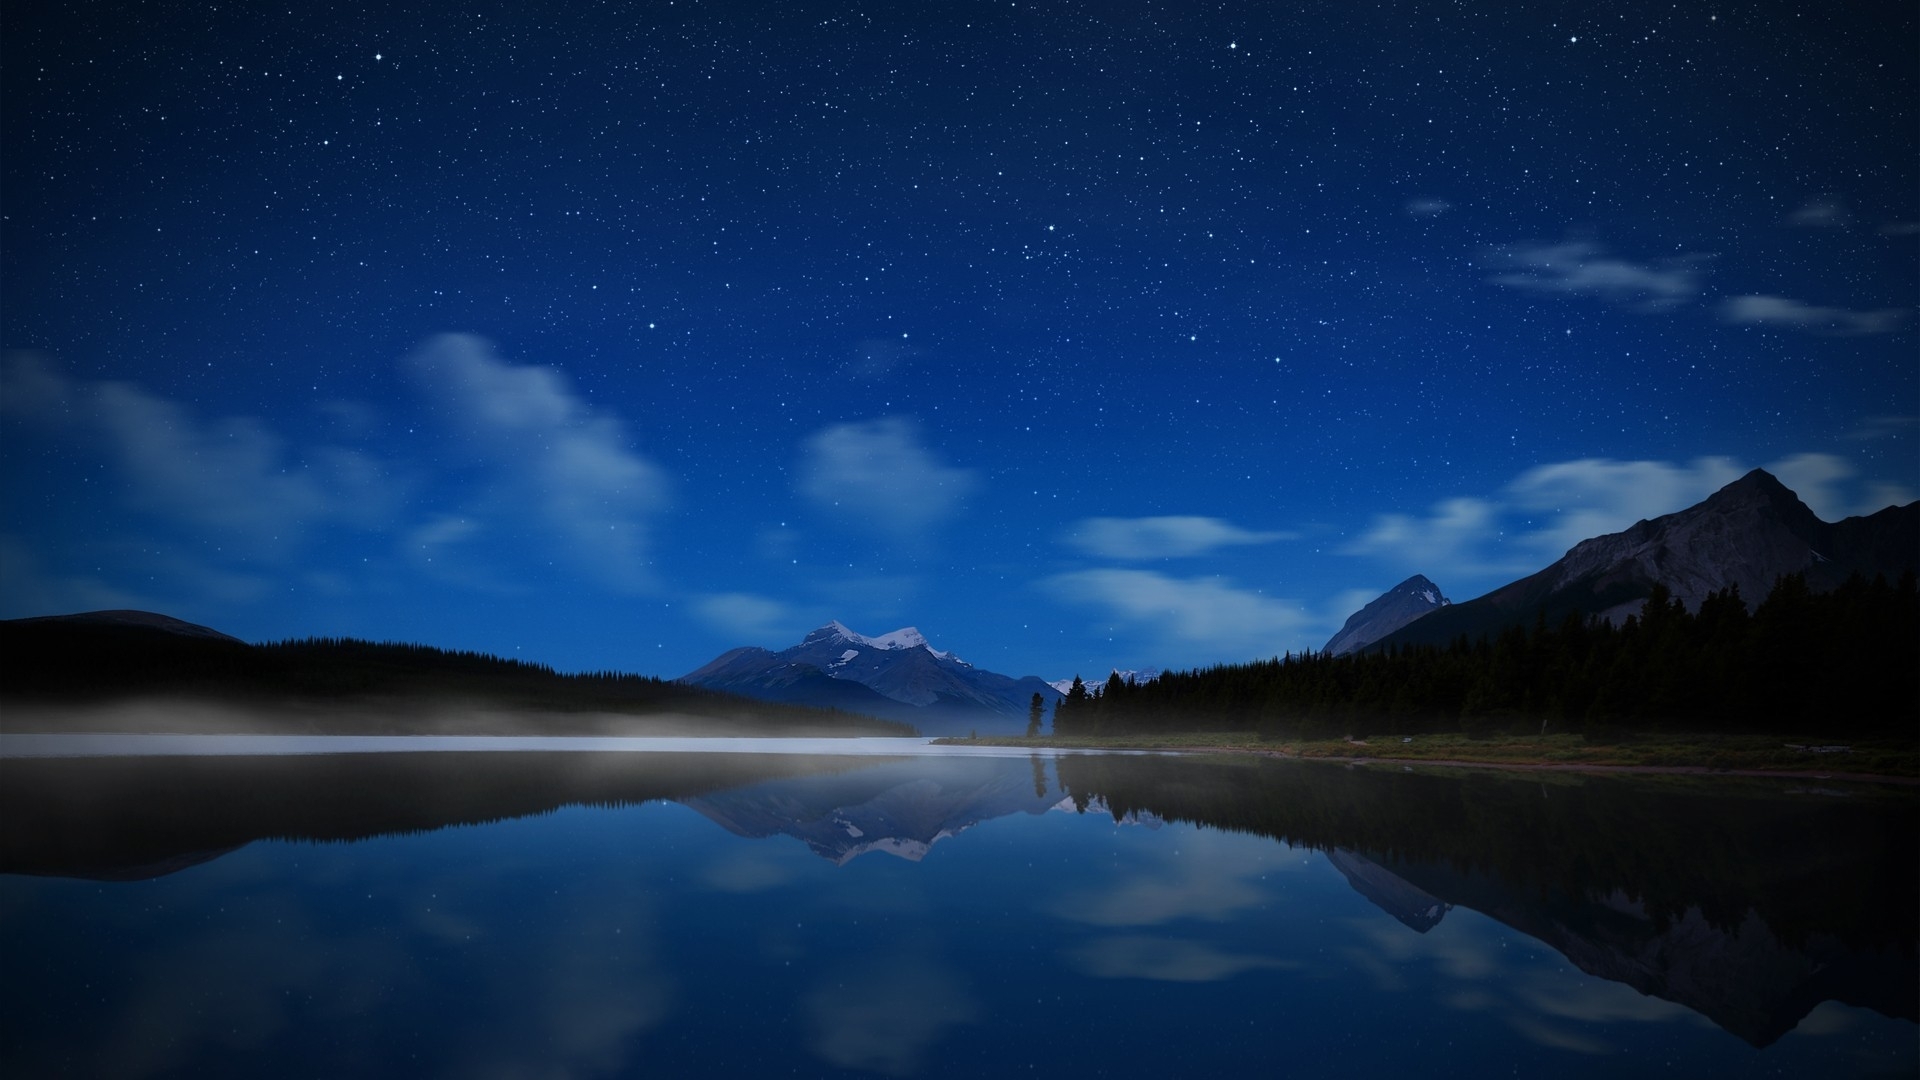 10 New Night Time Hd Wallpaper FULL HD 1920×1080 For PC Background